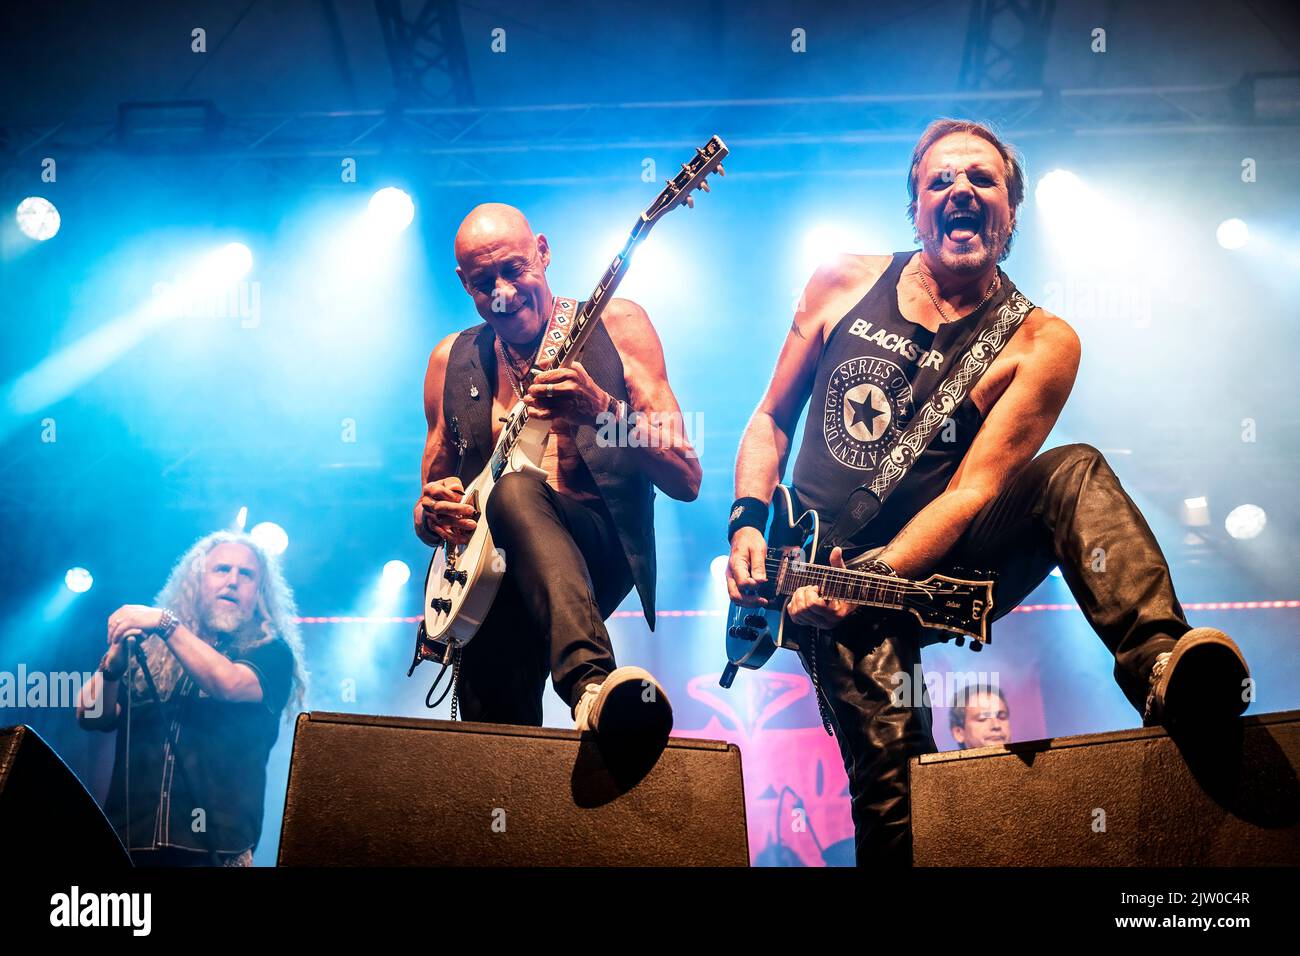 Solvesborg, Sweden. 10th, June 2022. The English heavy metal band Praying Mantis performs a live concert during the Swedish music festival Sweden Rock Festival 2022 in Solvesborg. Here guitarists Tino Troy (L) and Andy Burgess (R) are seen live on stage. (Photo credit: Gonzales Photo - Terje Dokken). Stock Photo